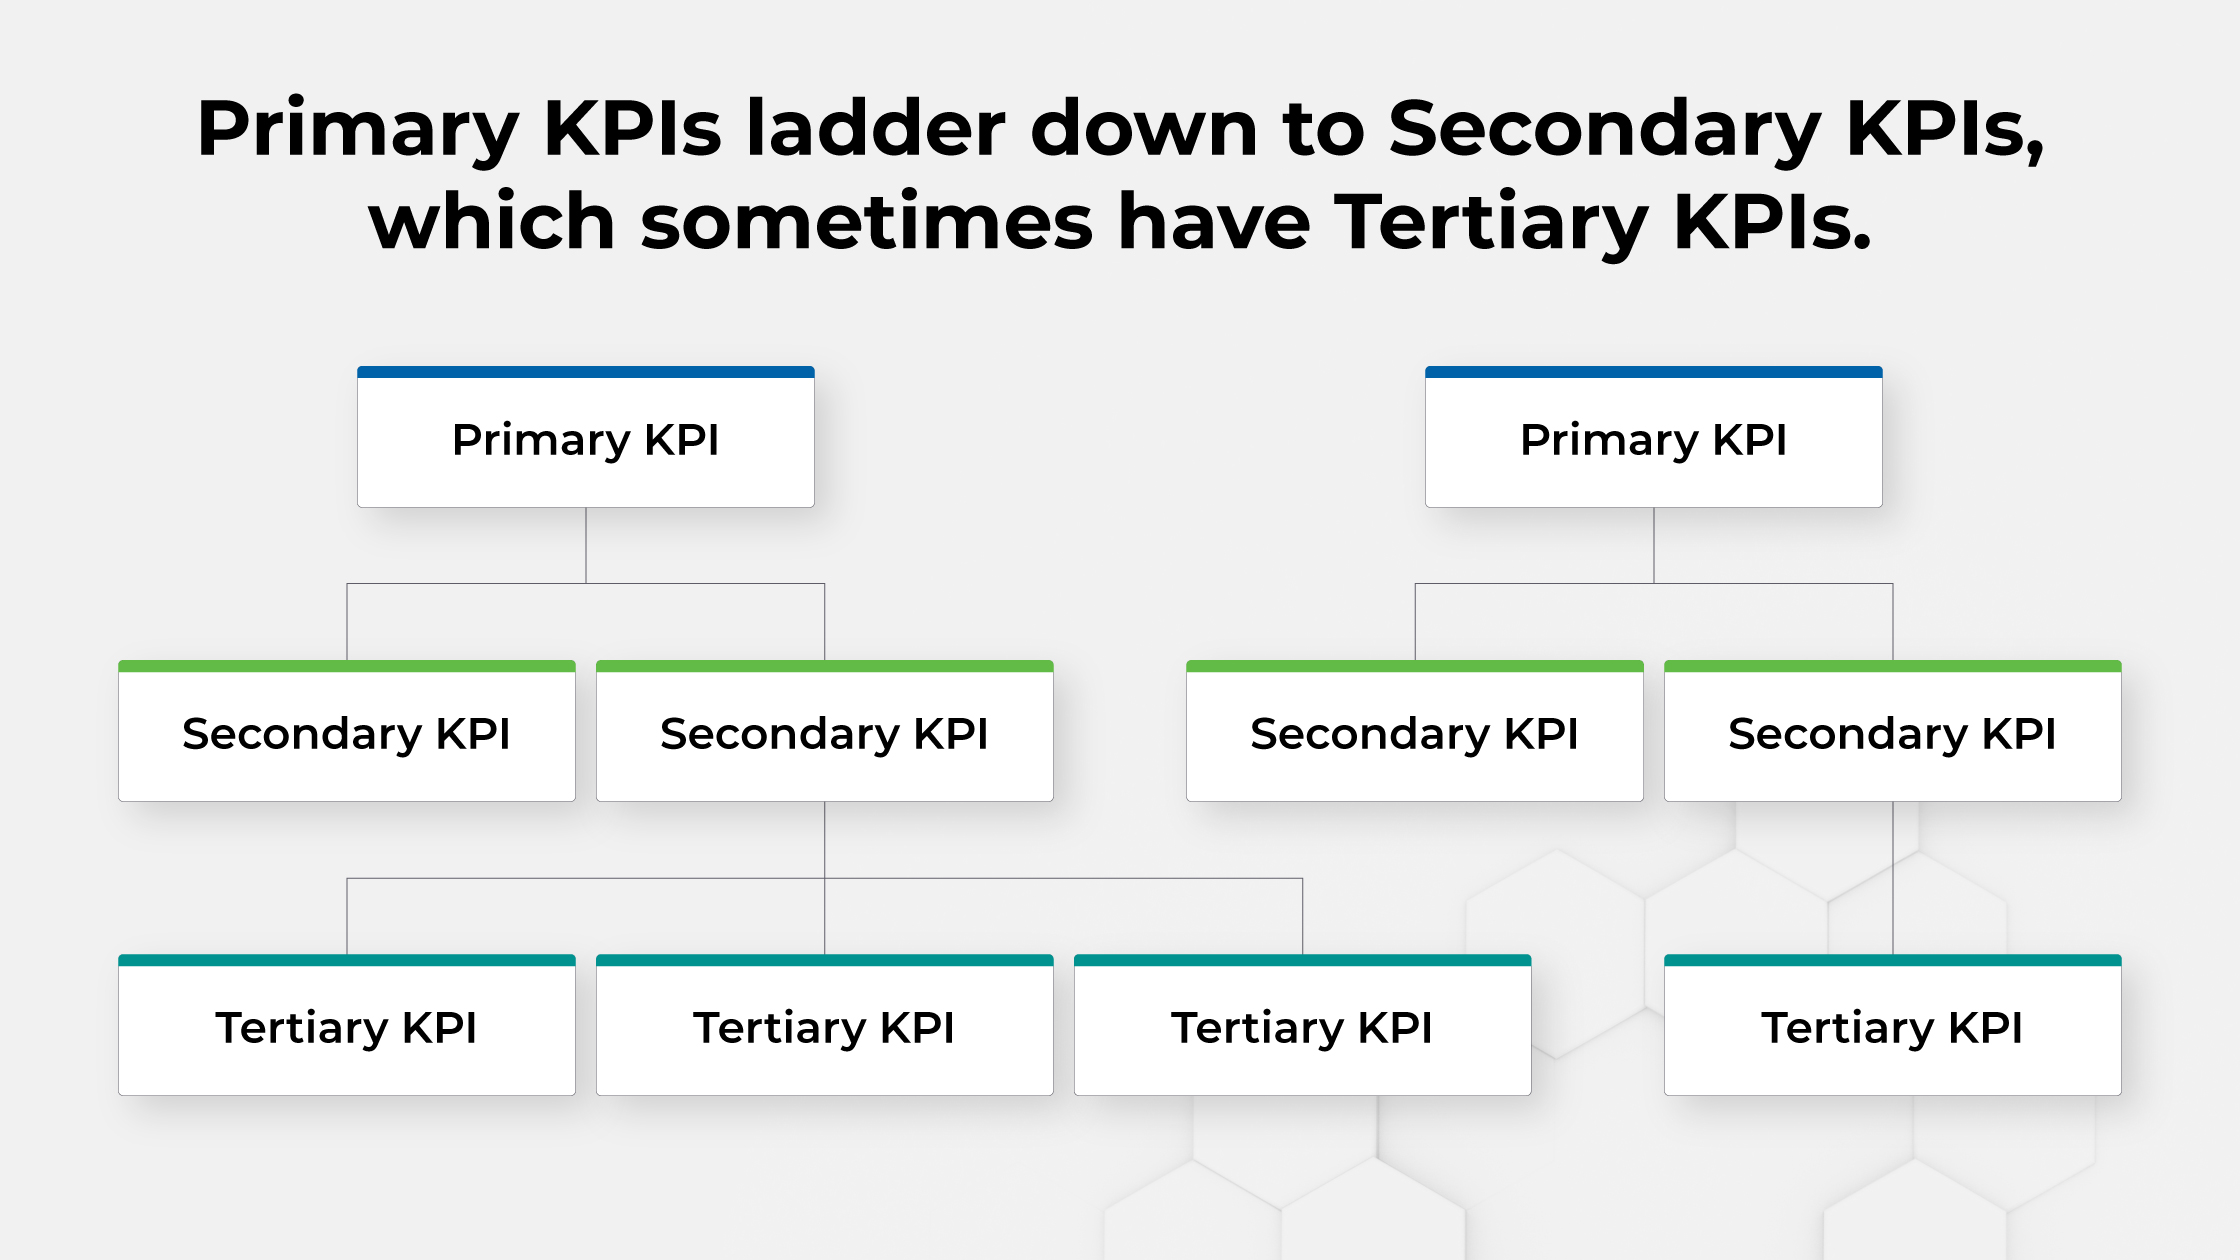 Primary KPIs ladder down to Secondary KPIs, which sometimes have Tertiary KPIs.